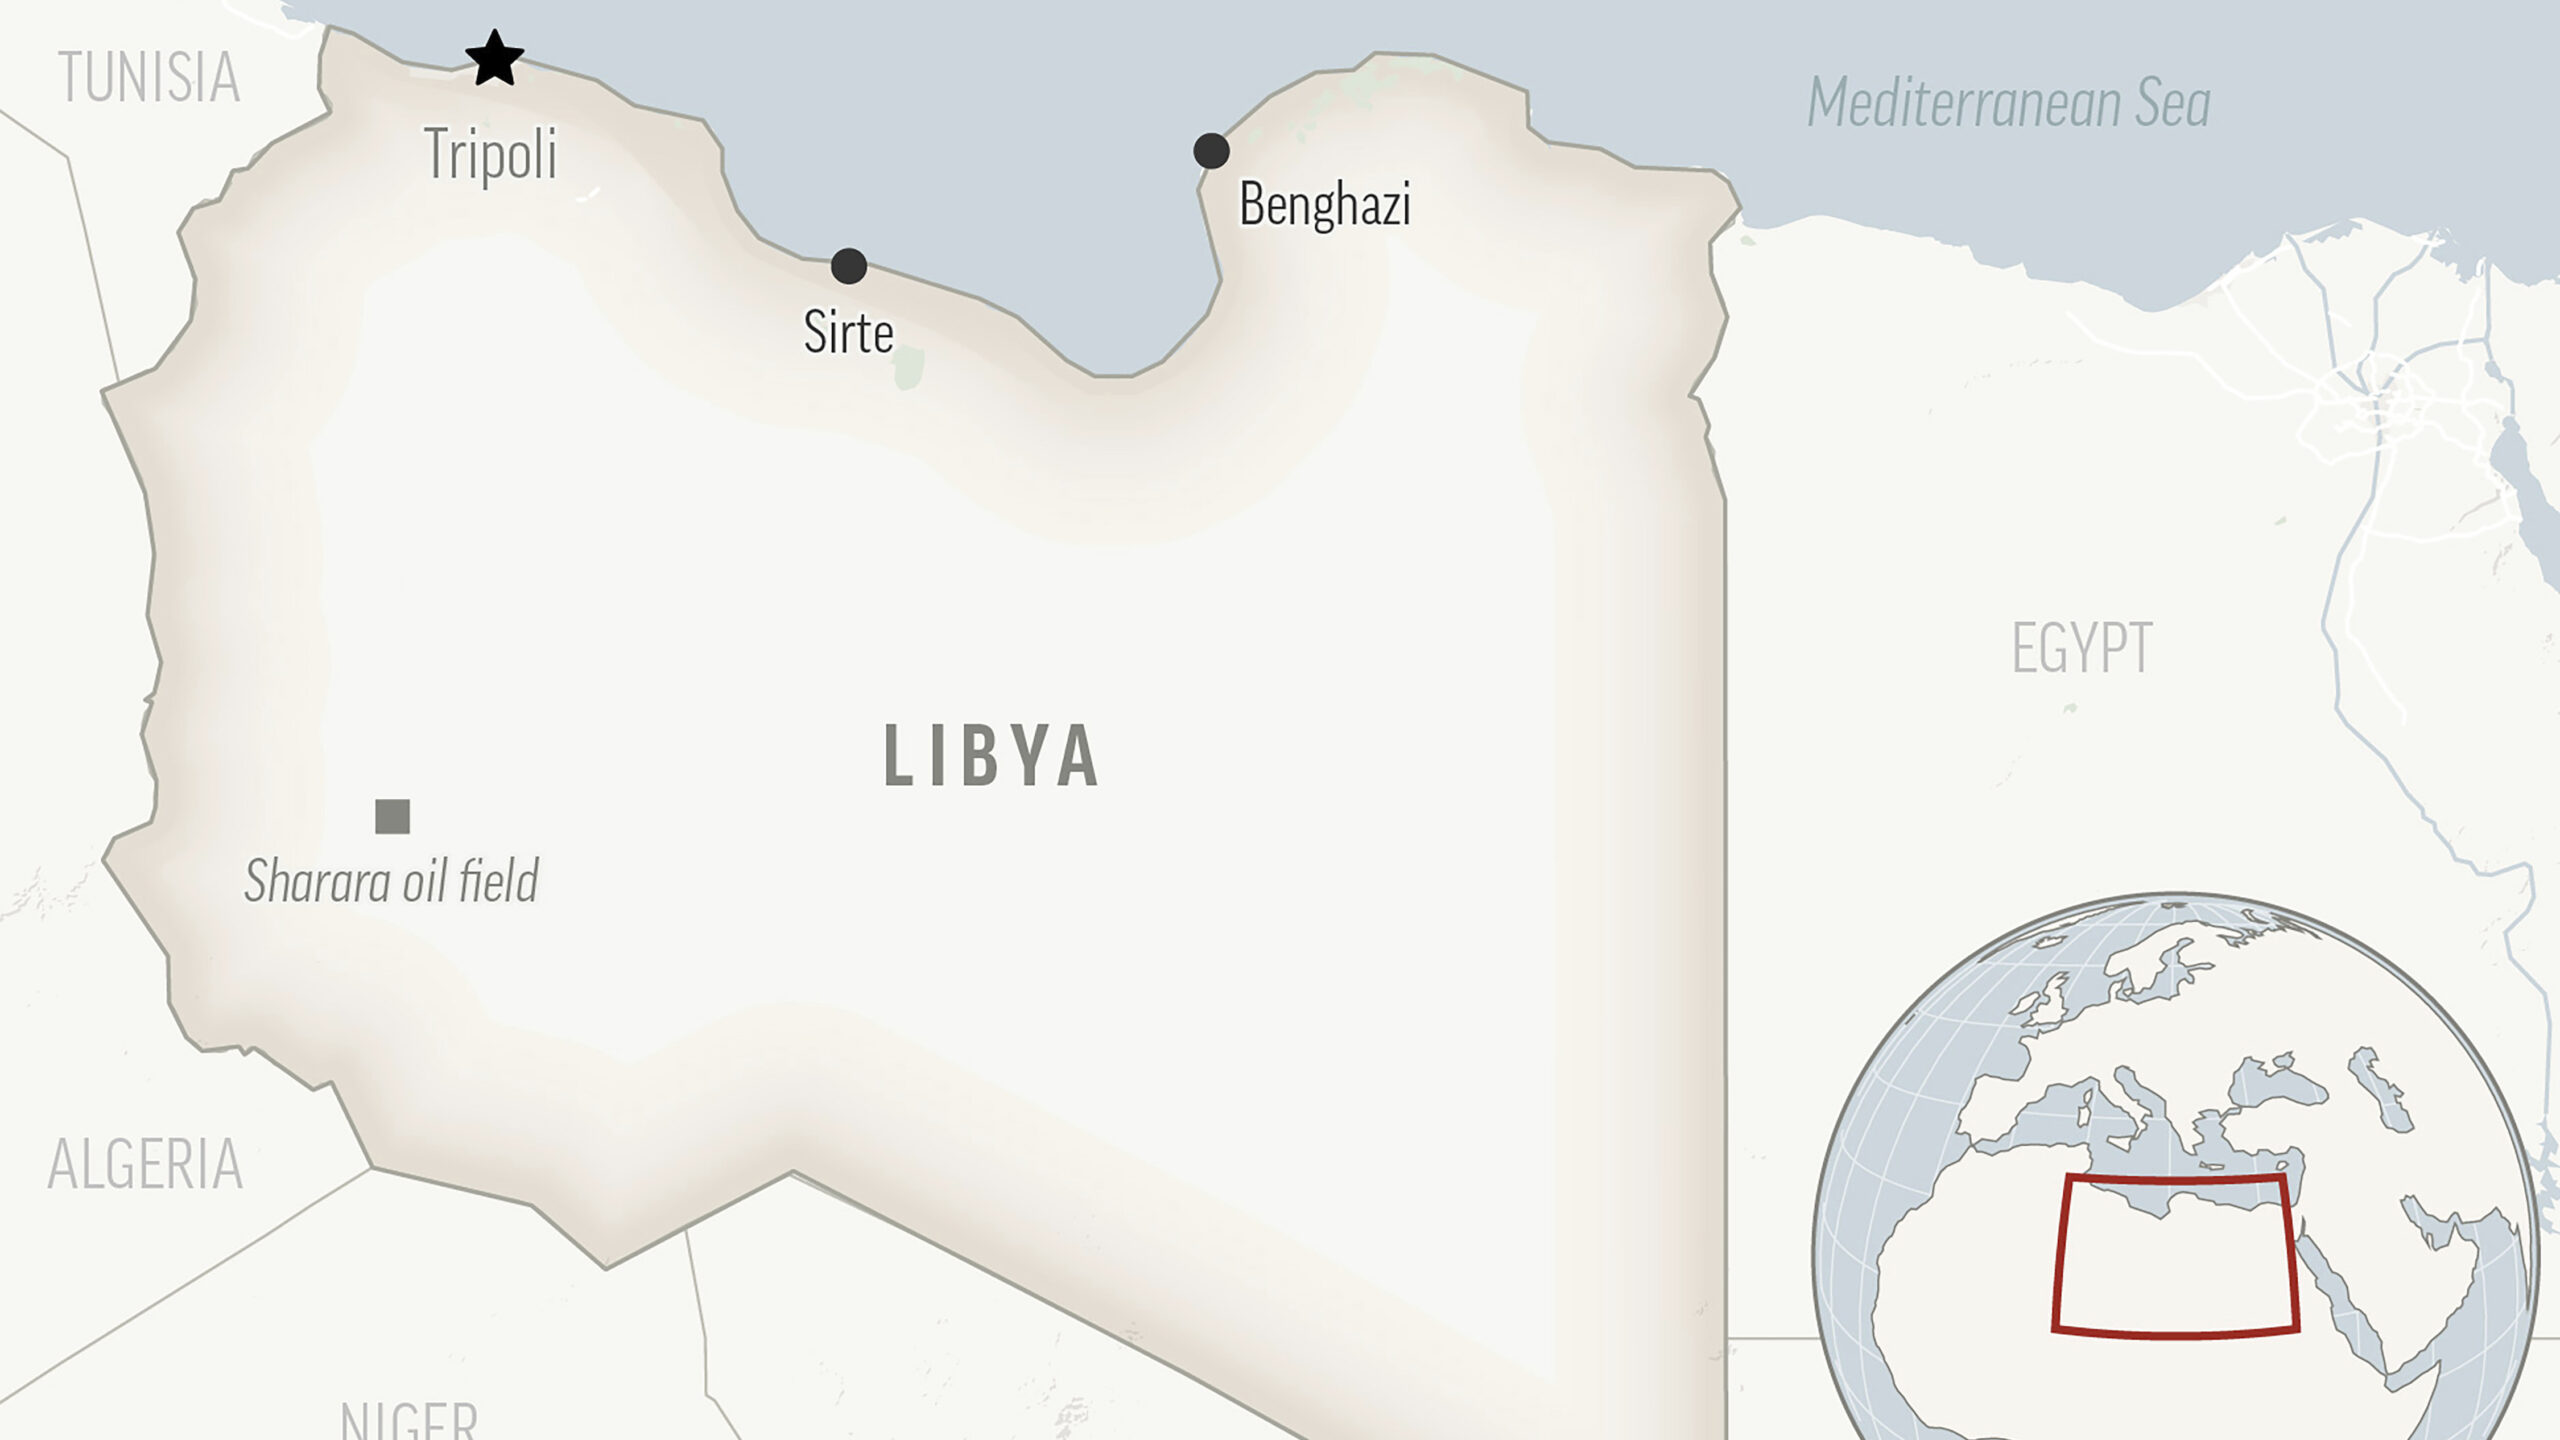 More than 60 people drowned when a migrant vessel capsized off Libya, U.N. says